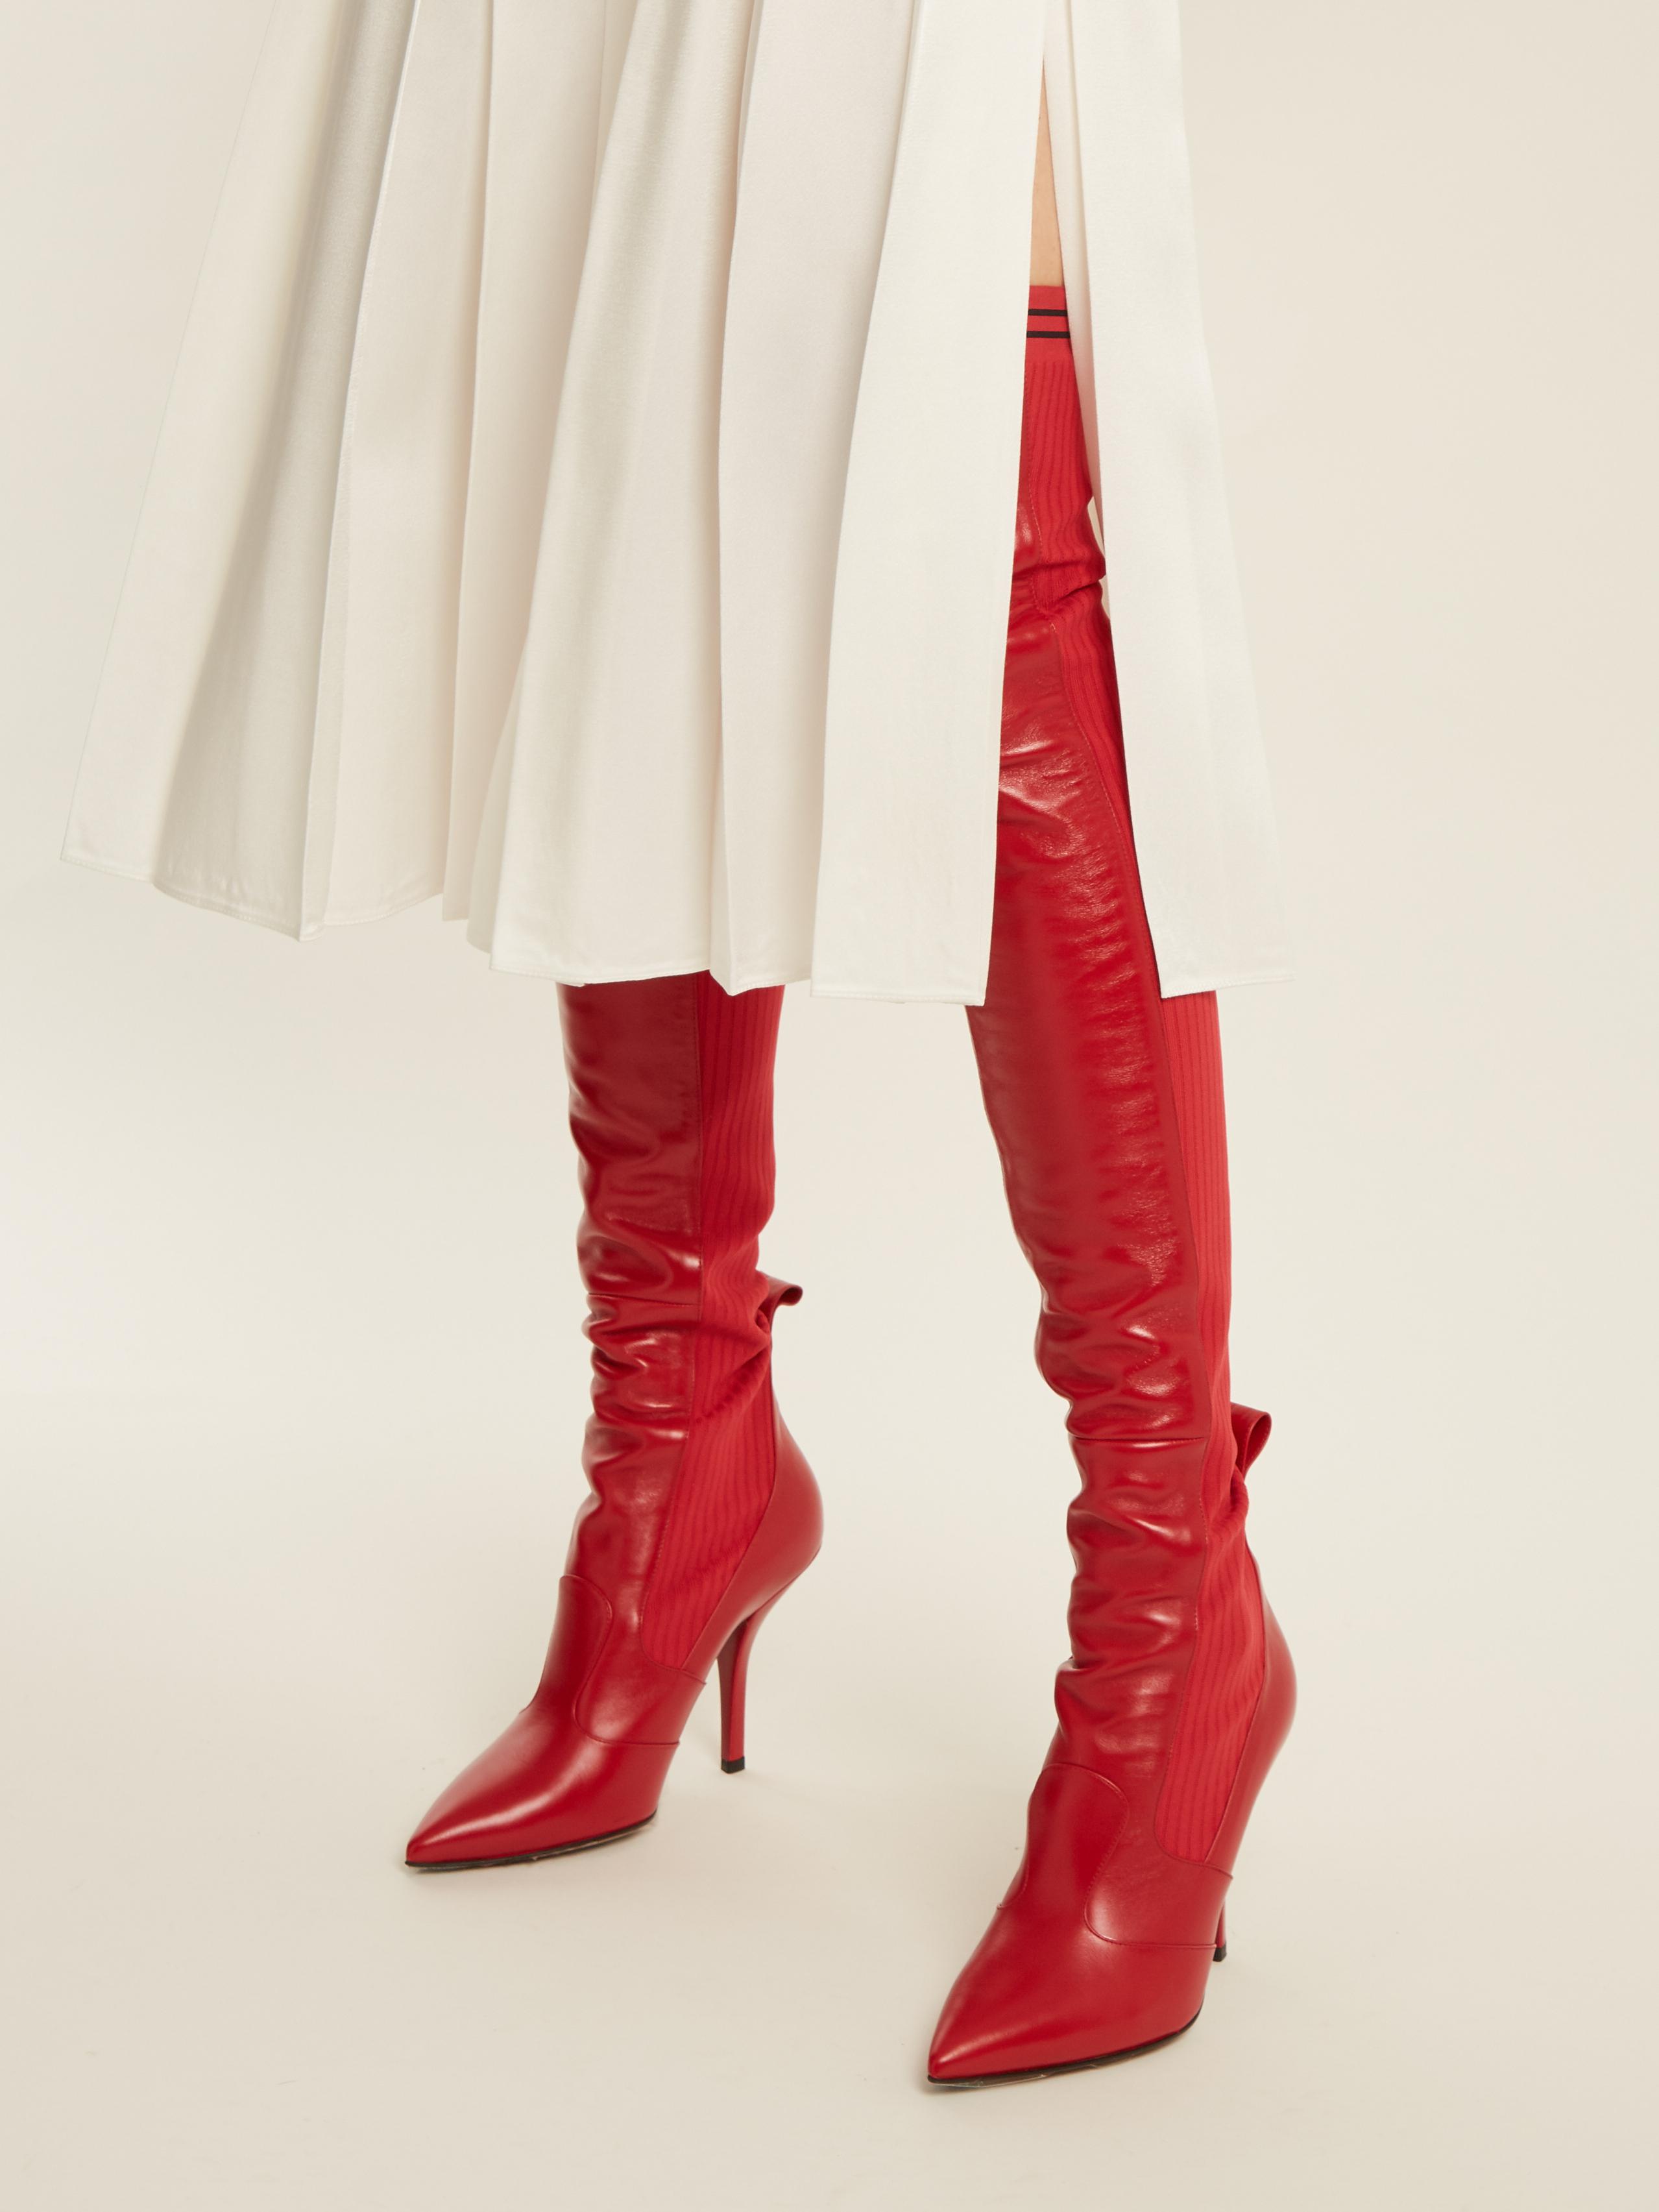 Fendi 105mm Leather & Knit Over The Knee Boots in Red | Lyst